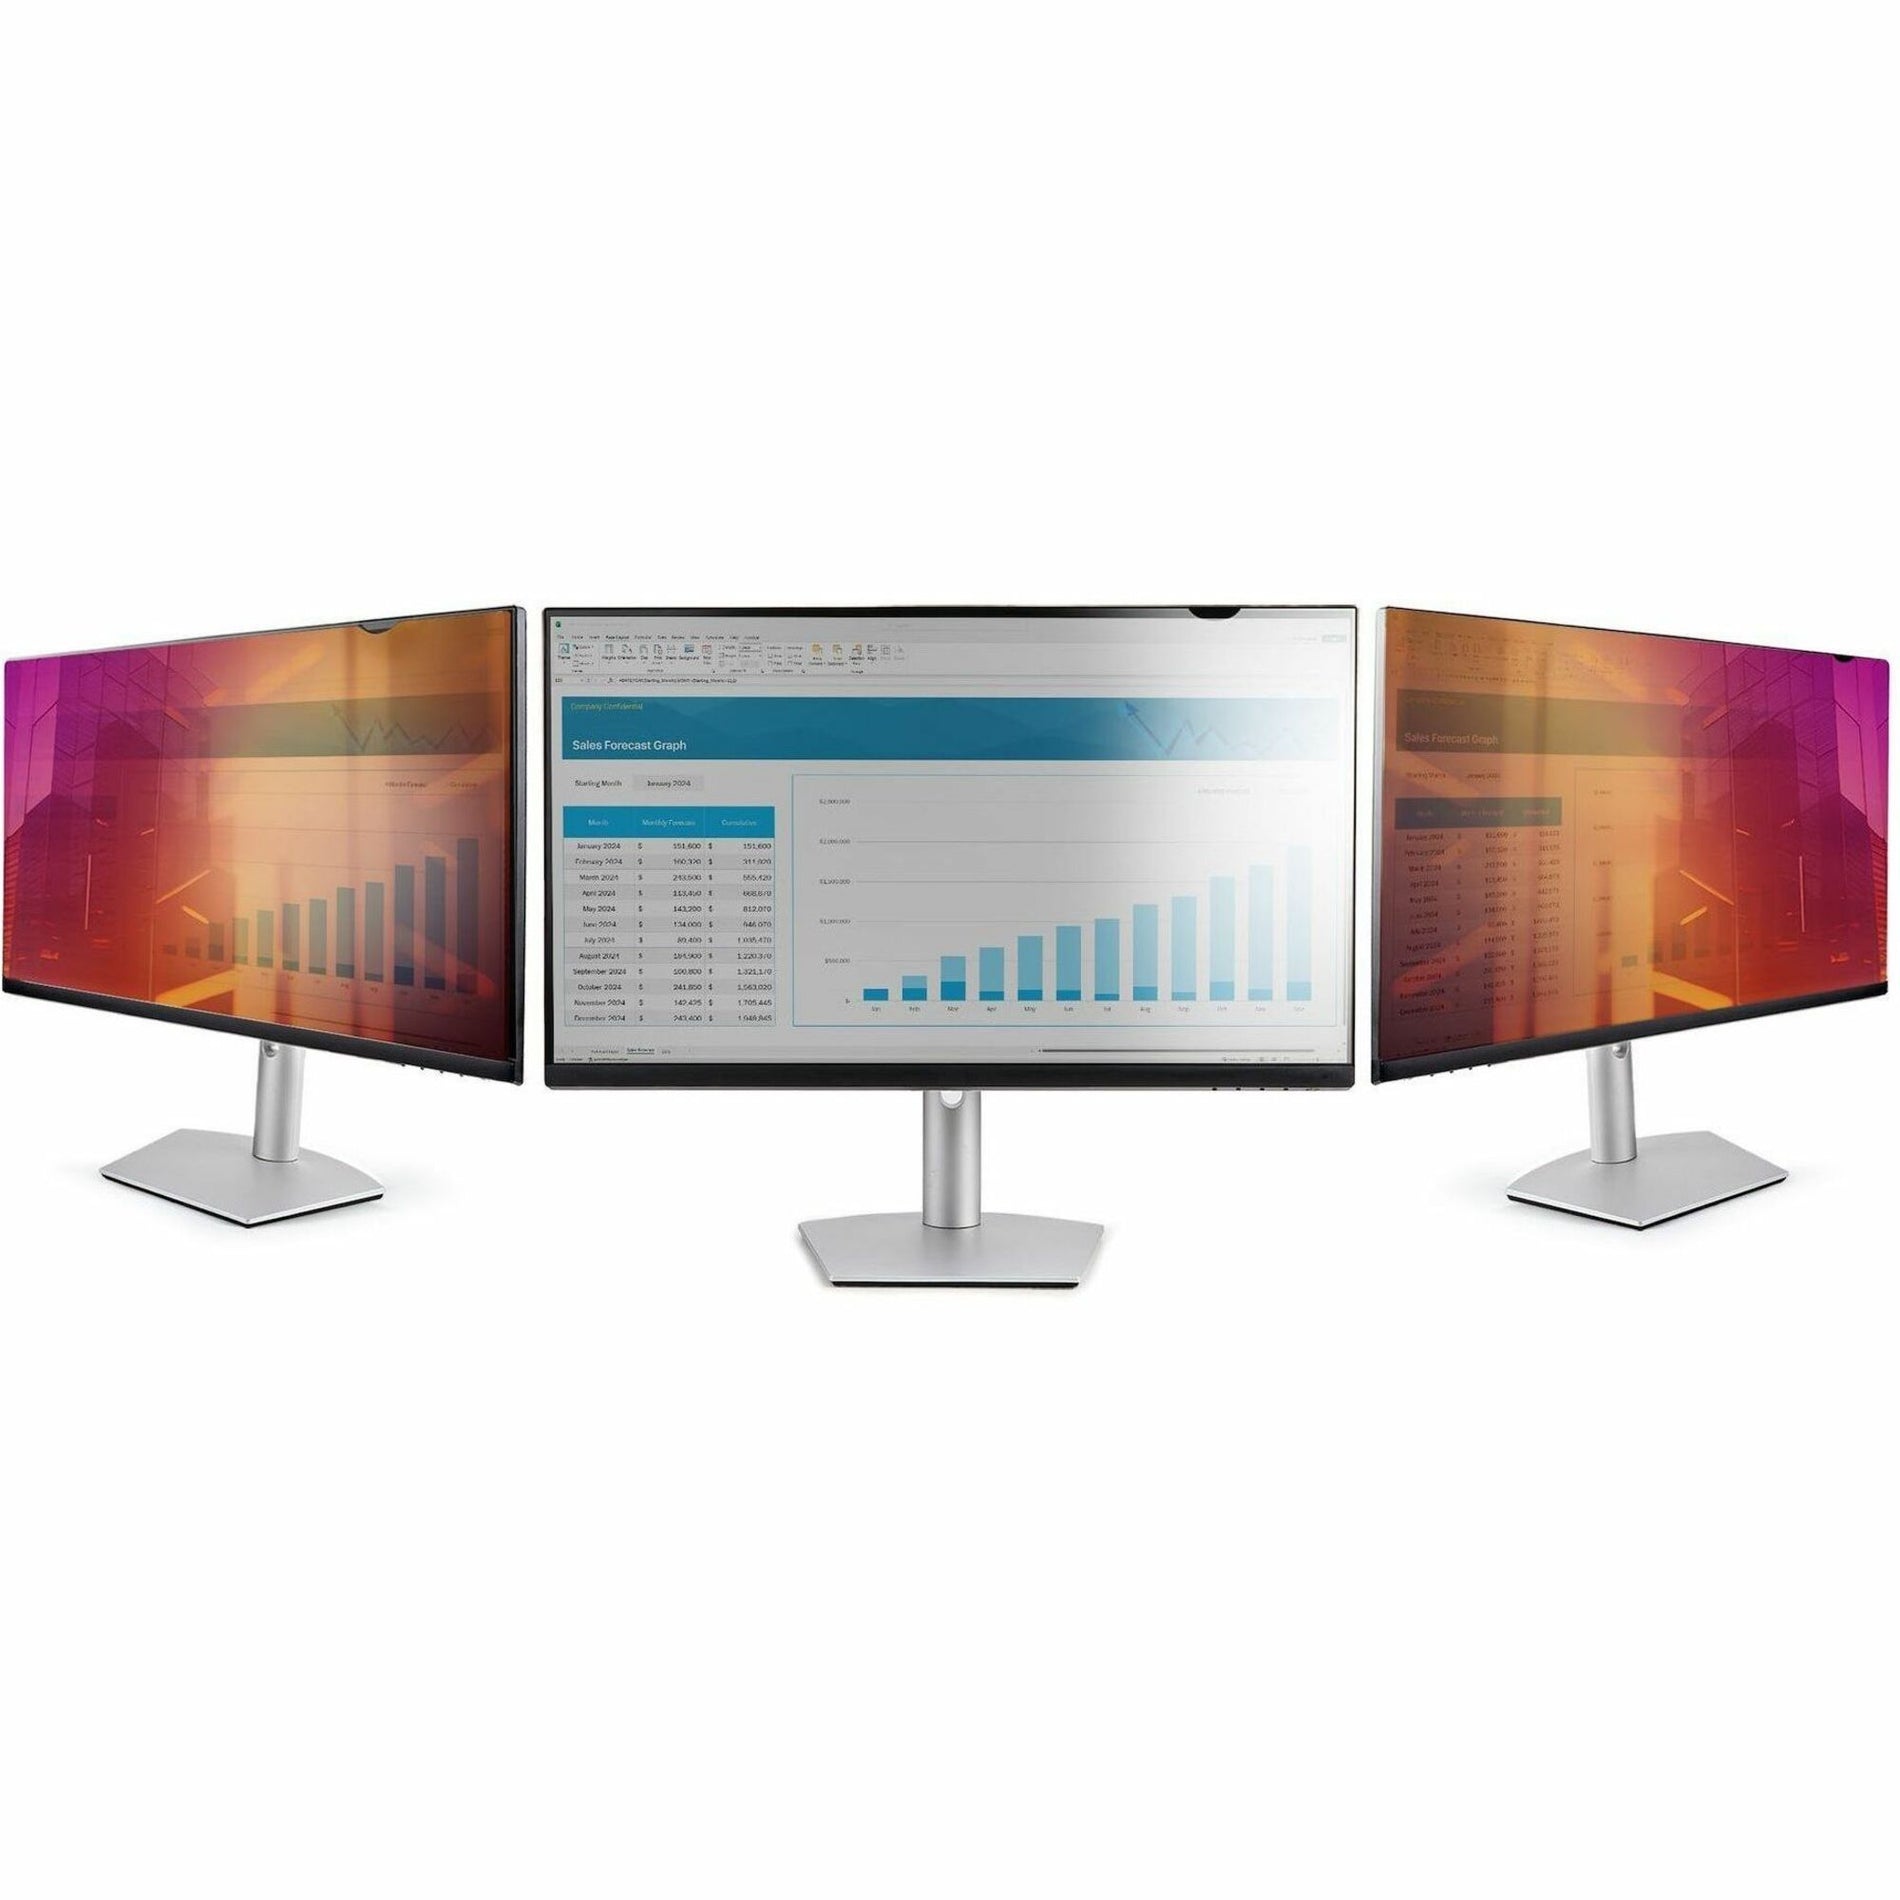 StarTech.com 2461G-PRIVACY-SCREEN Privacy Screen Filter, Limited Viewing Angle, Eyesight Protection, Removable, Residue-free, 24" Display Size Supported